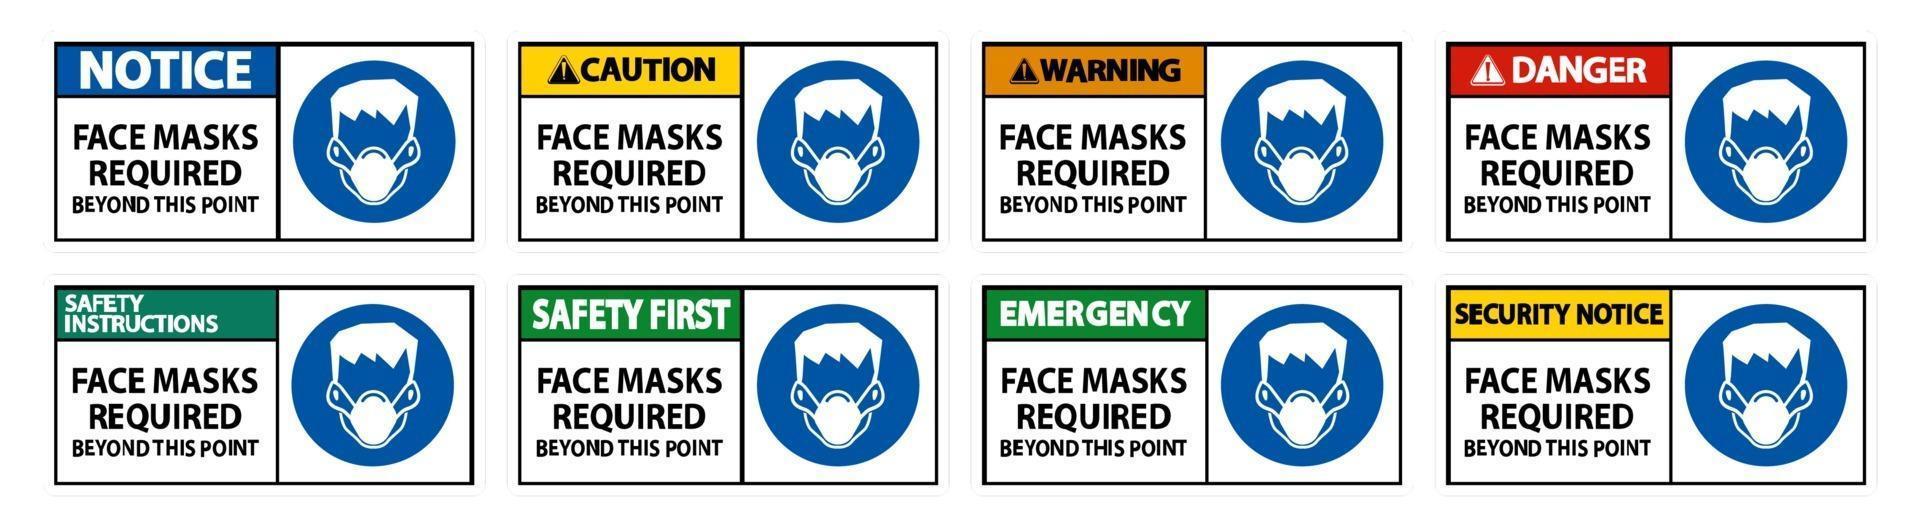 Face Masks Required Beyond This Point Sign Isolate On White Background vector